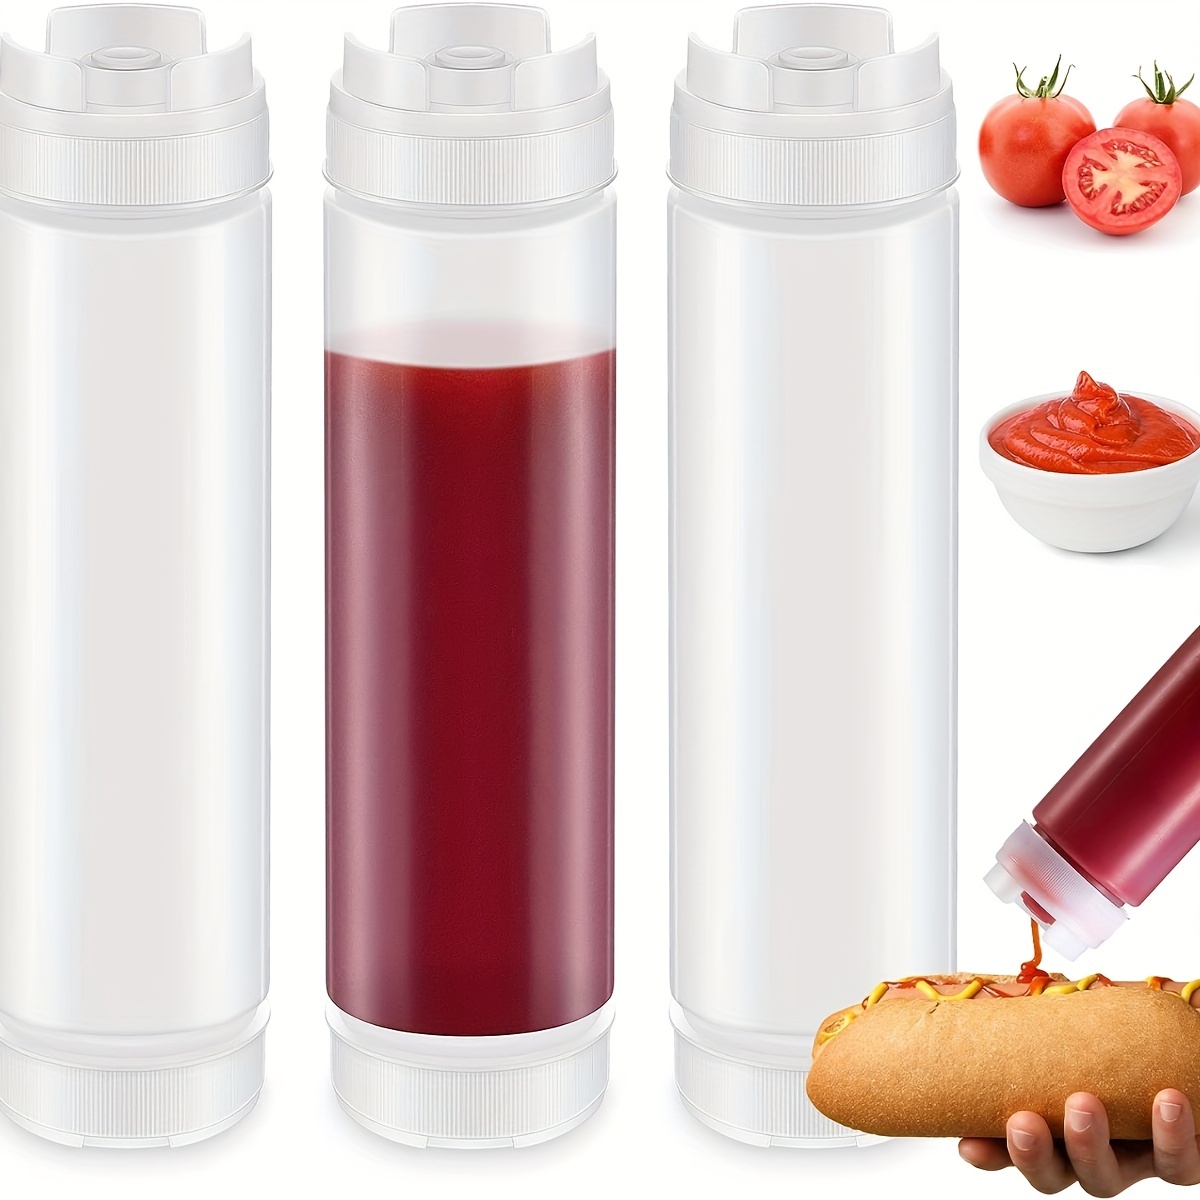 480/240ml Condiment Squeeze Bottles Durable Plastic Squeeze Squirt Bottle  for Ketchup BBQ Sauces Syrup Condiments